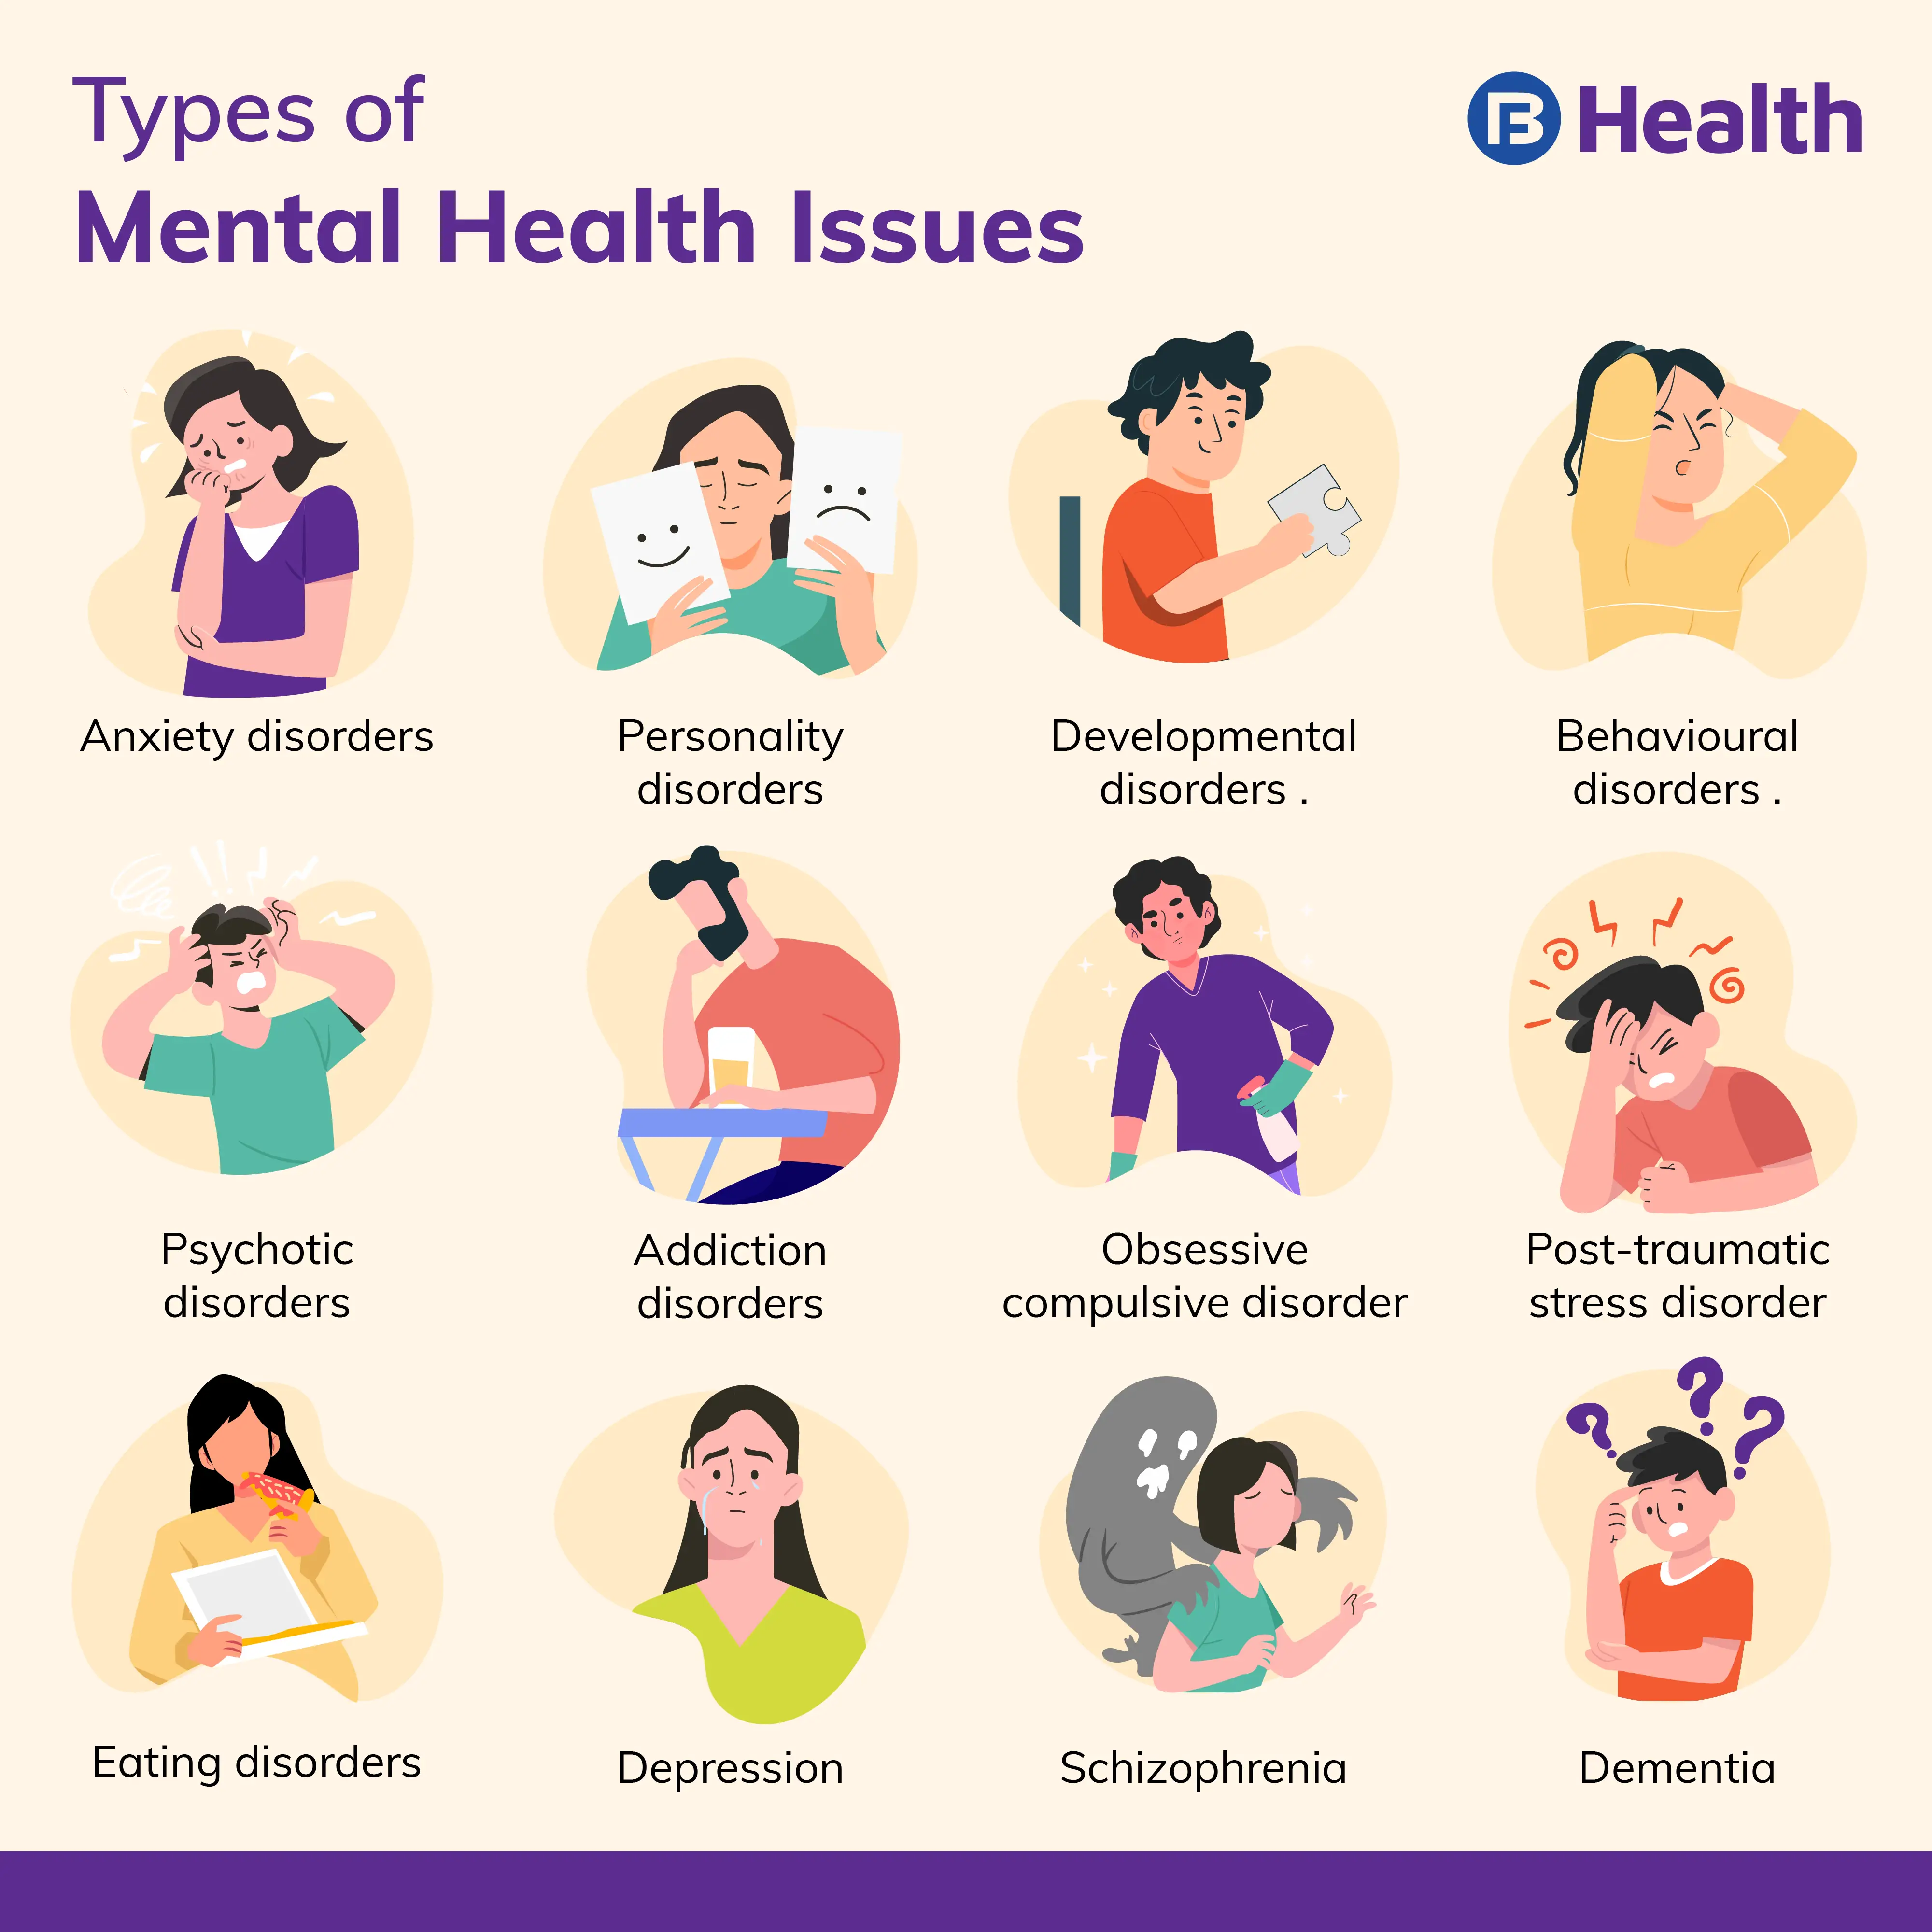 7 Important Ways to Take Care of Your Mental Health